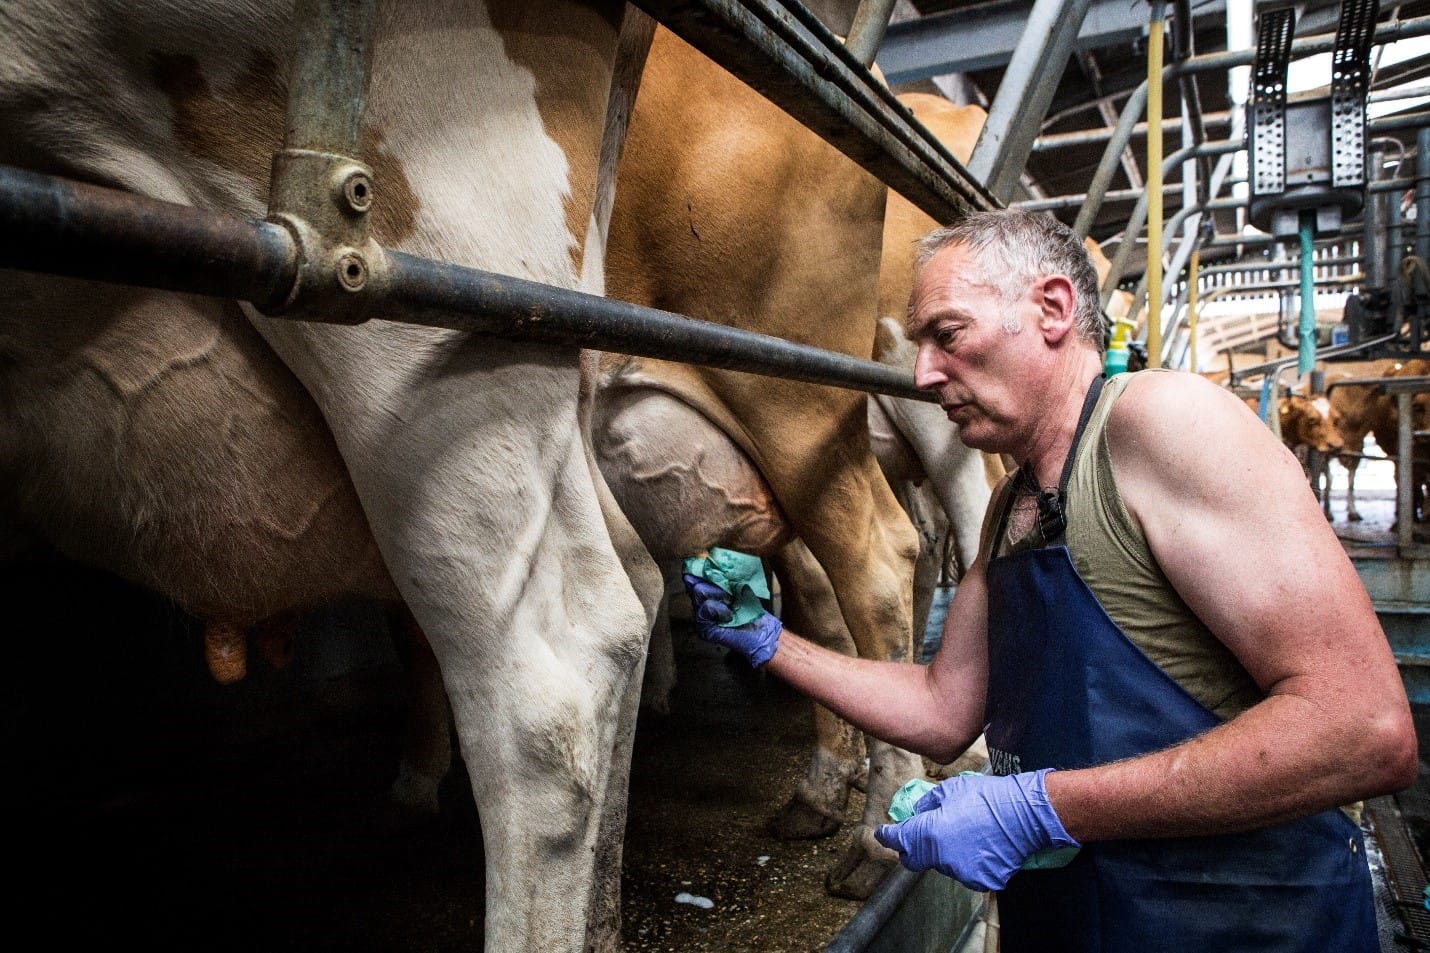 All employees in the milking parlour must wear latex gloves, while milking, to curb the spread of any pathogens or infection.